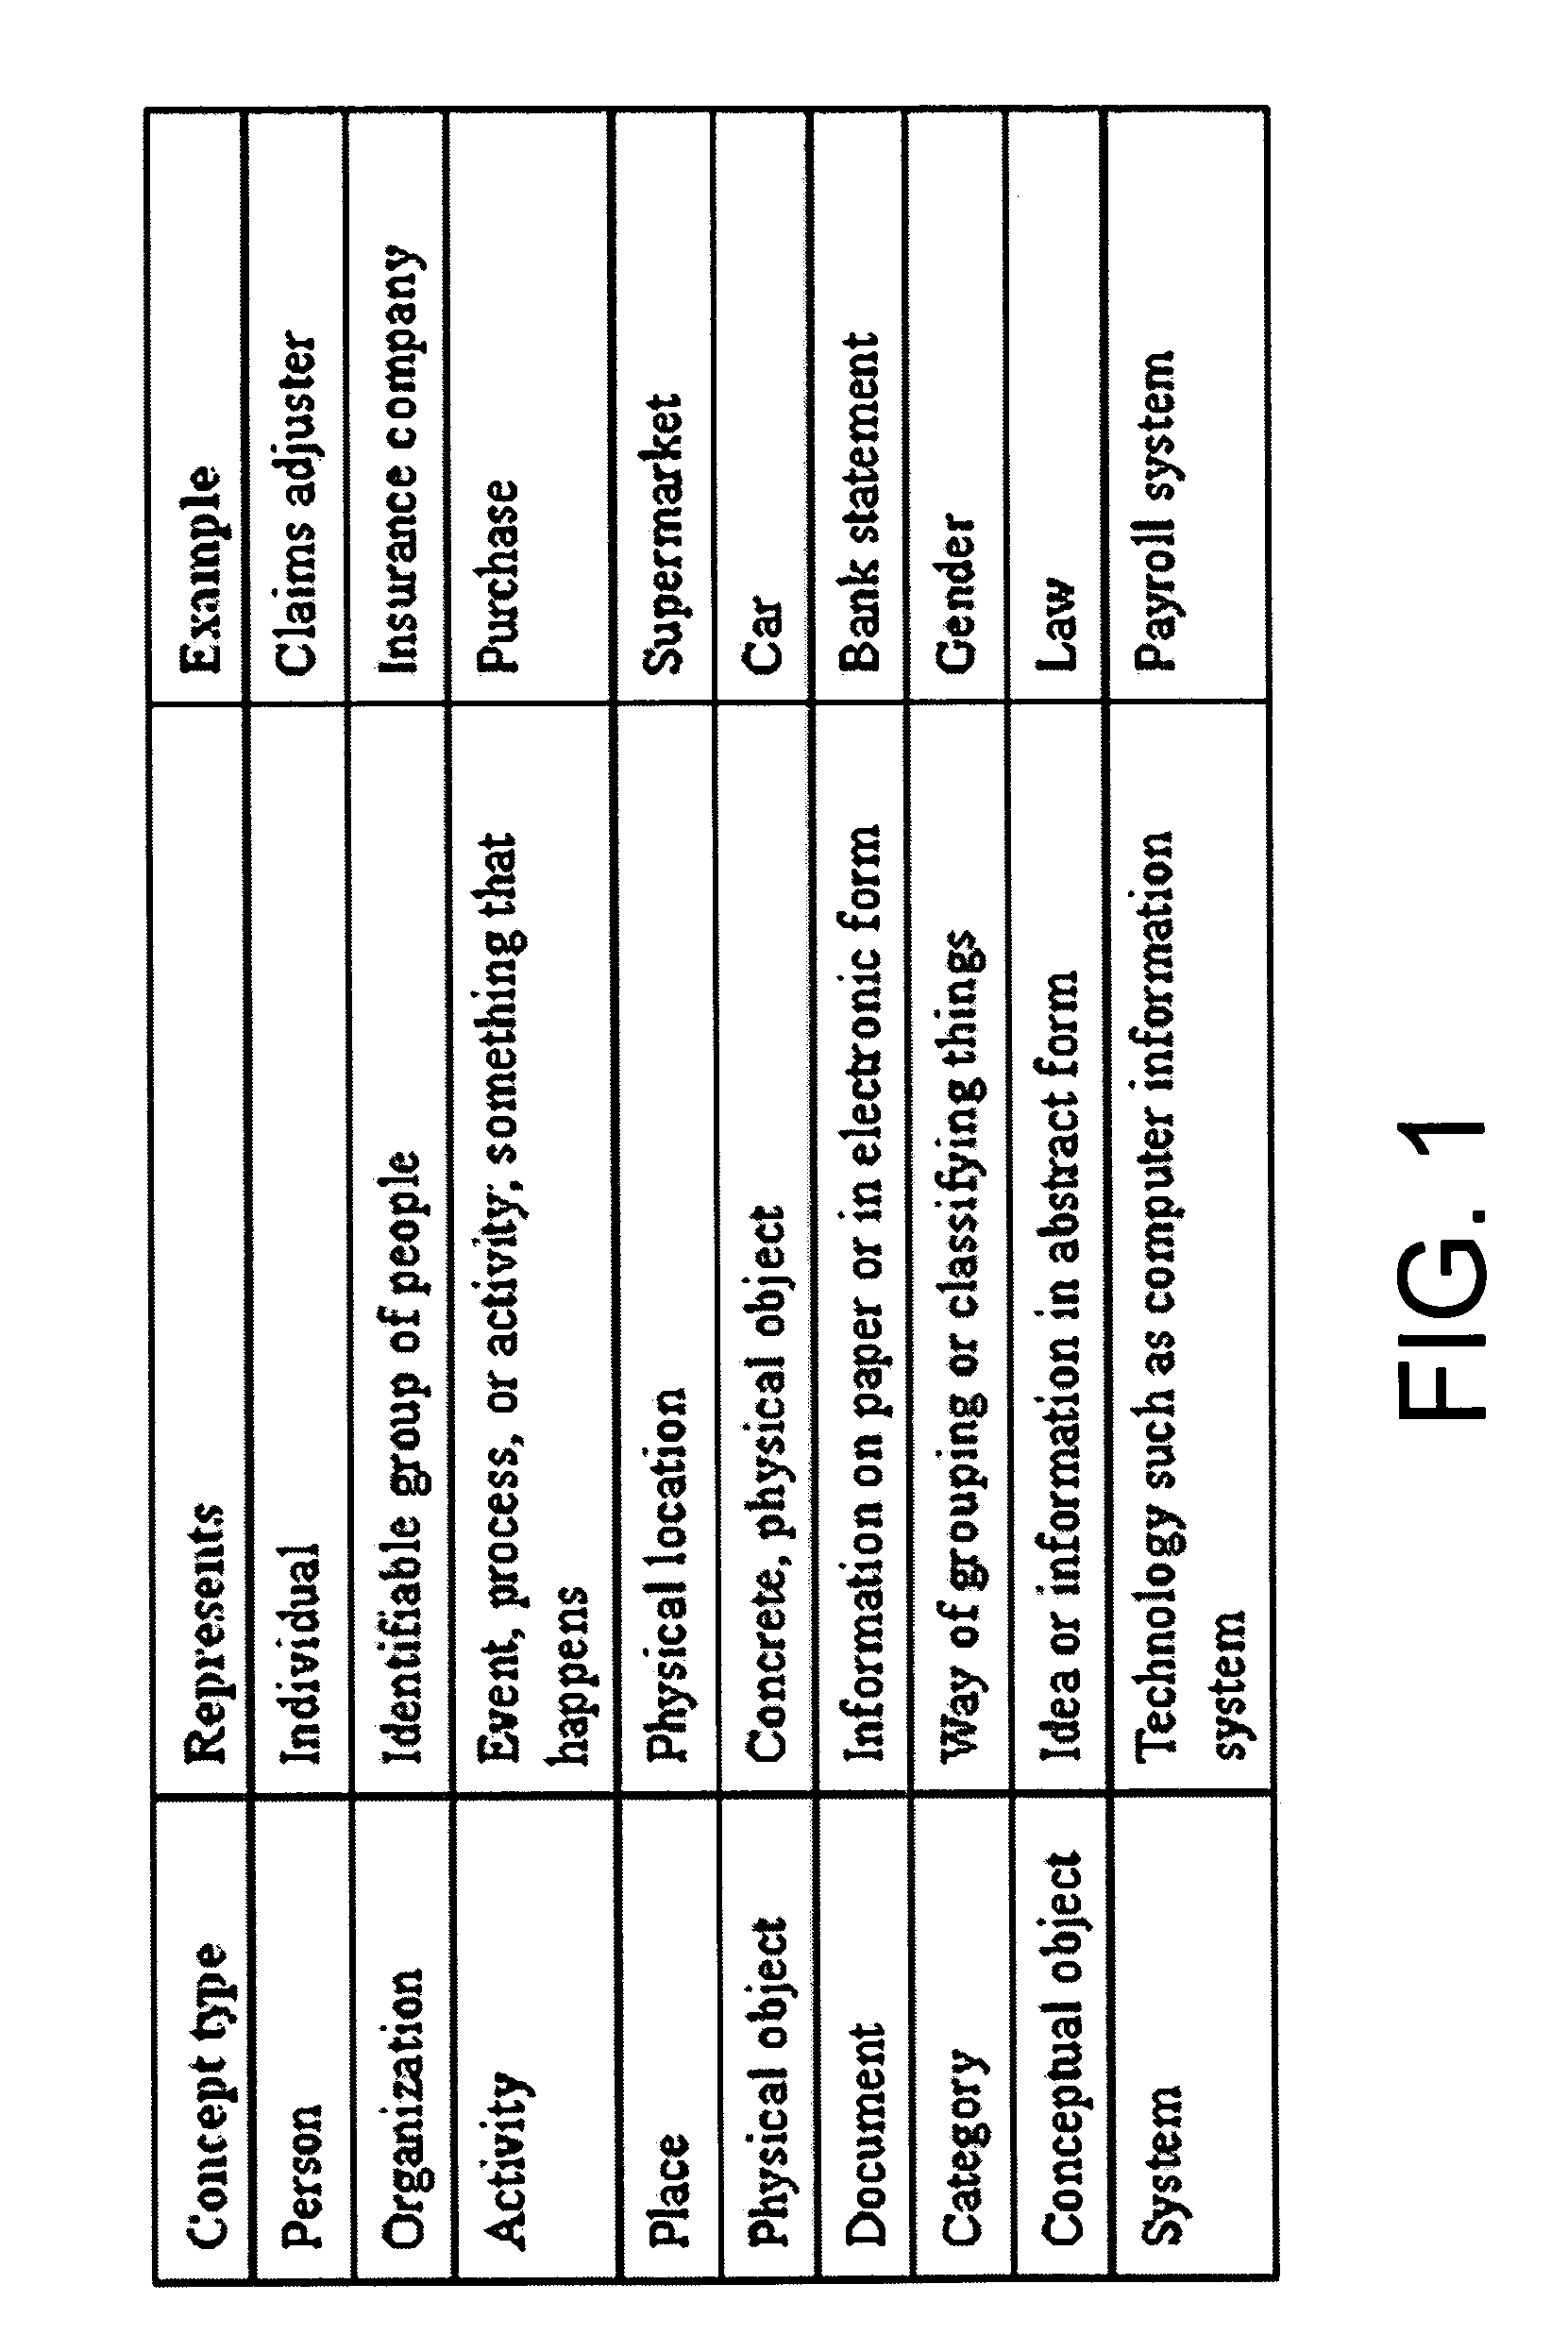 Systems and methods for software based on business concepts